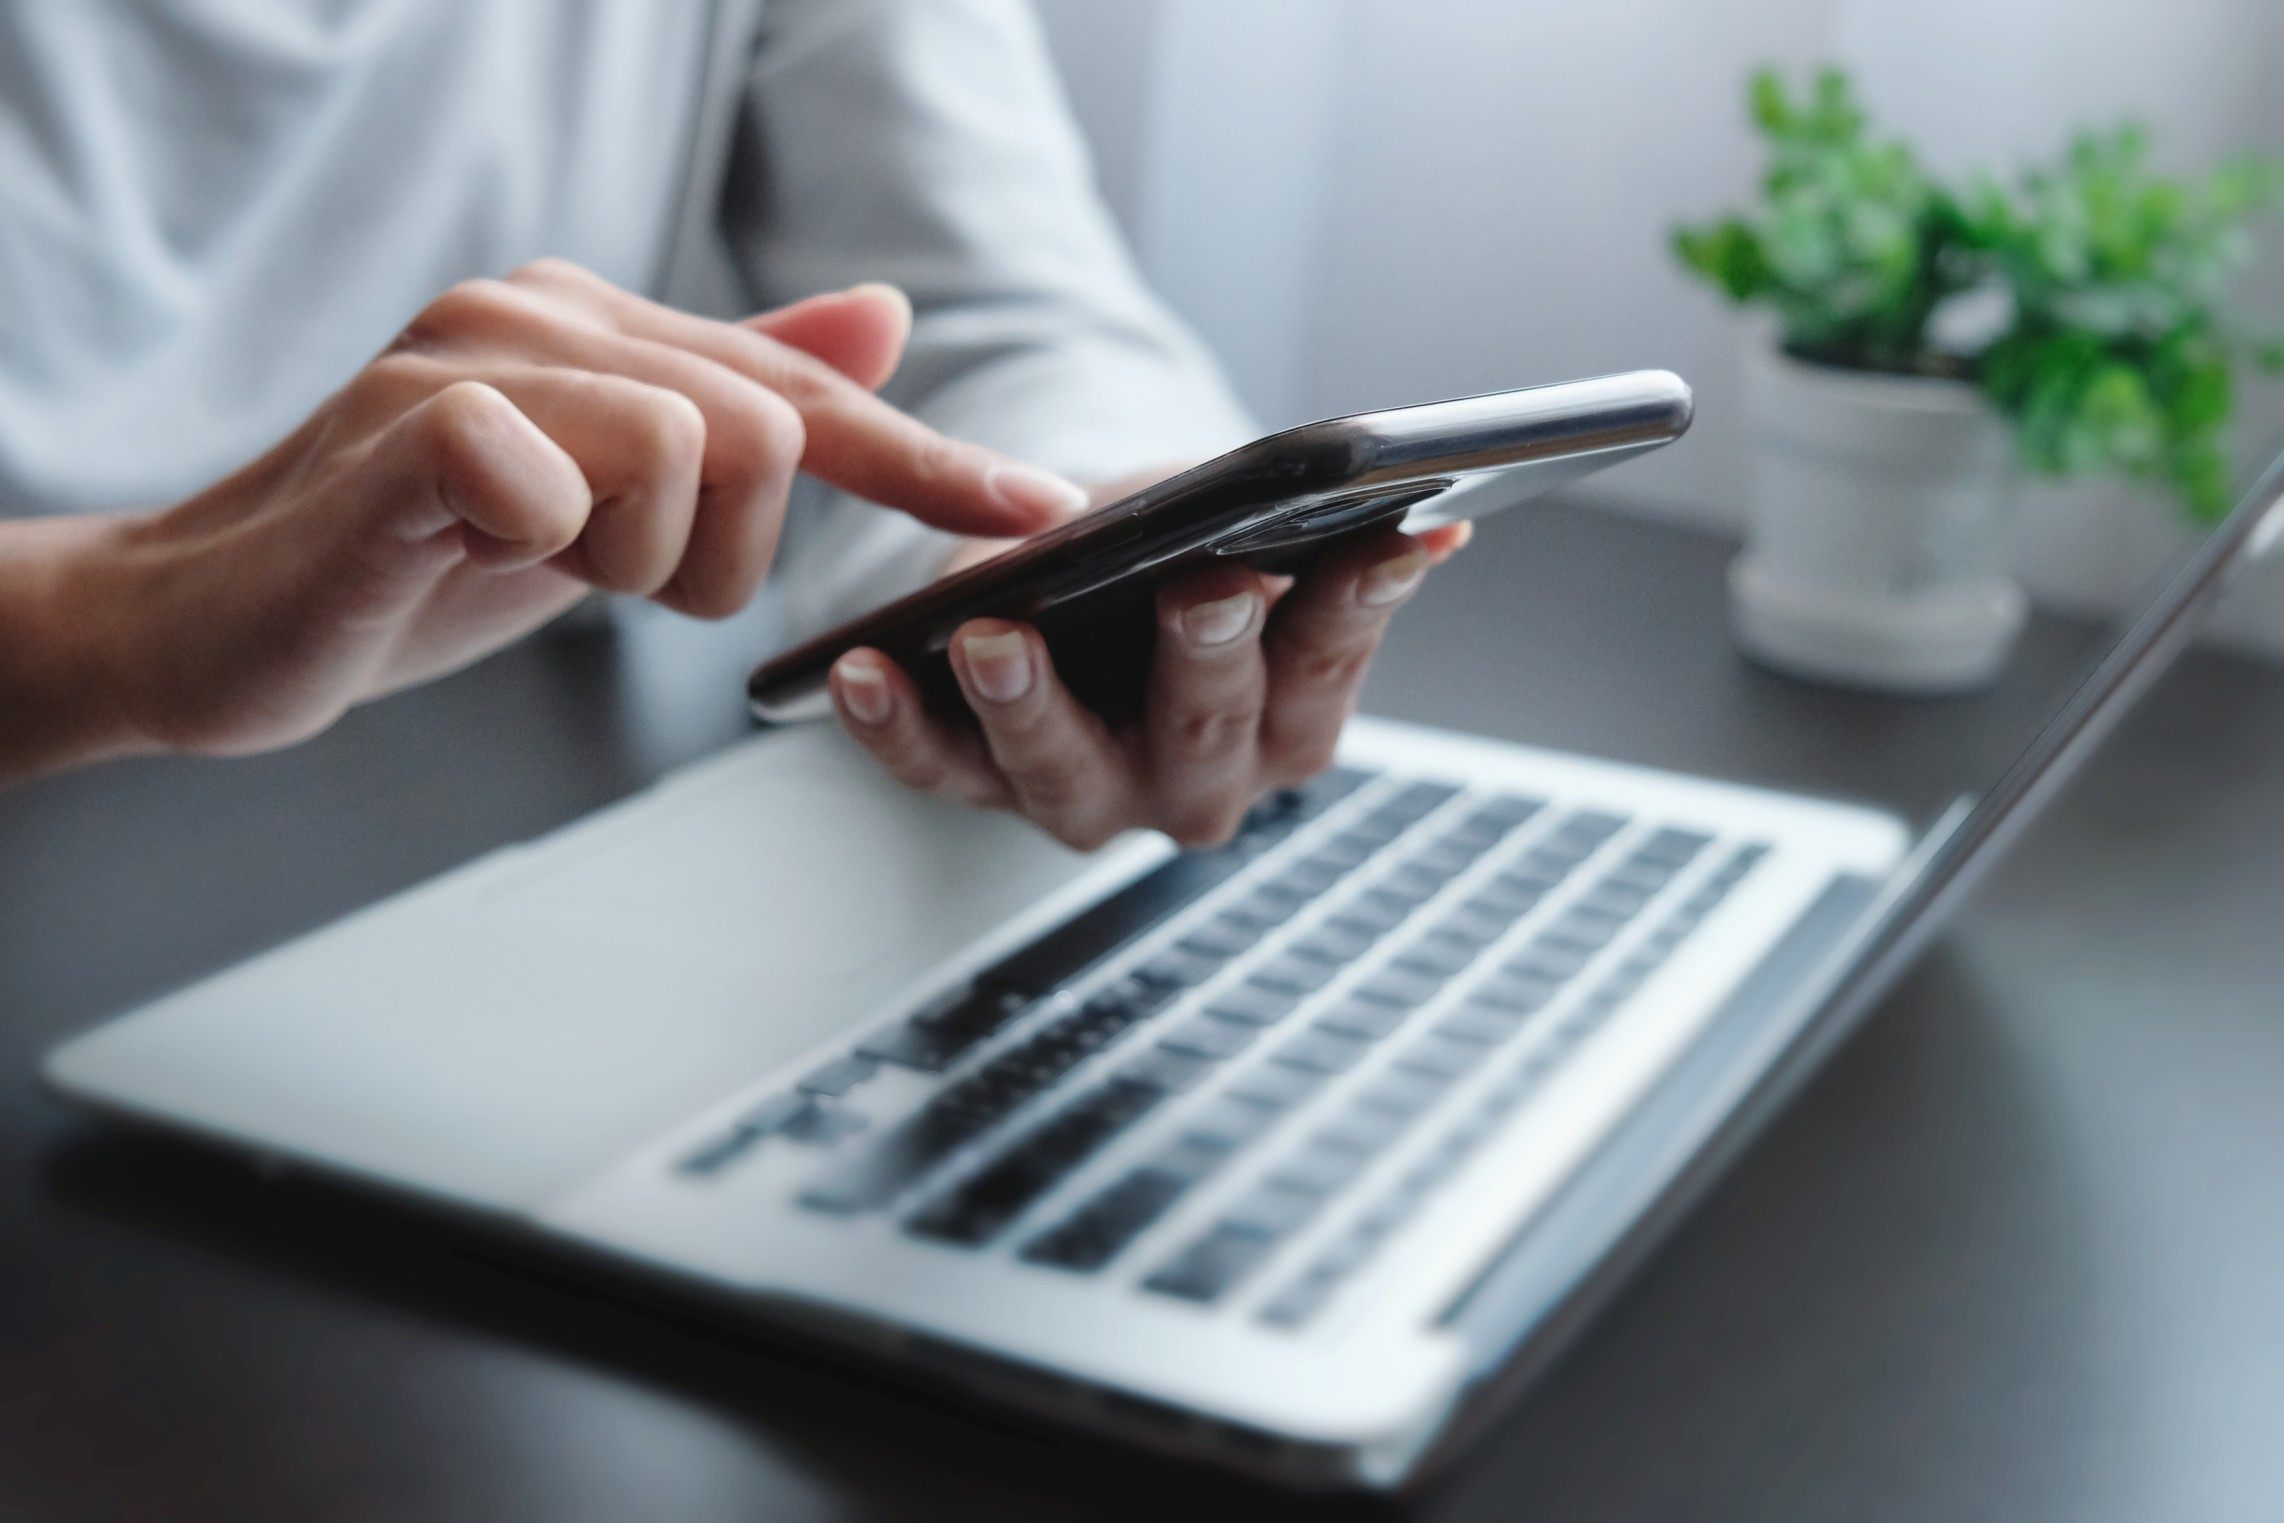 Online banking has grown in popularity since the Covid-19 pandemic. Photo: Shutterstock